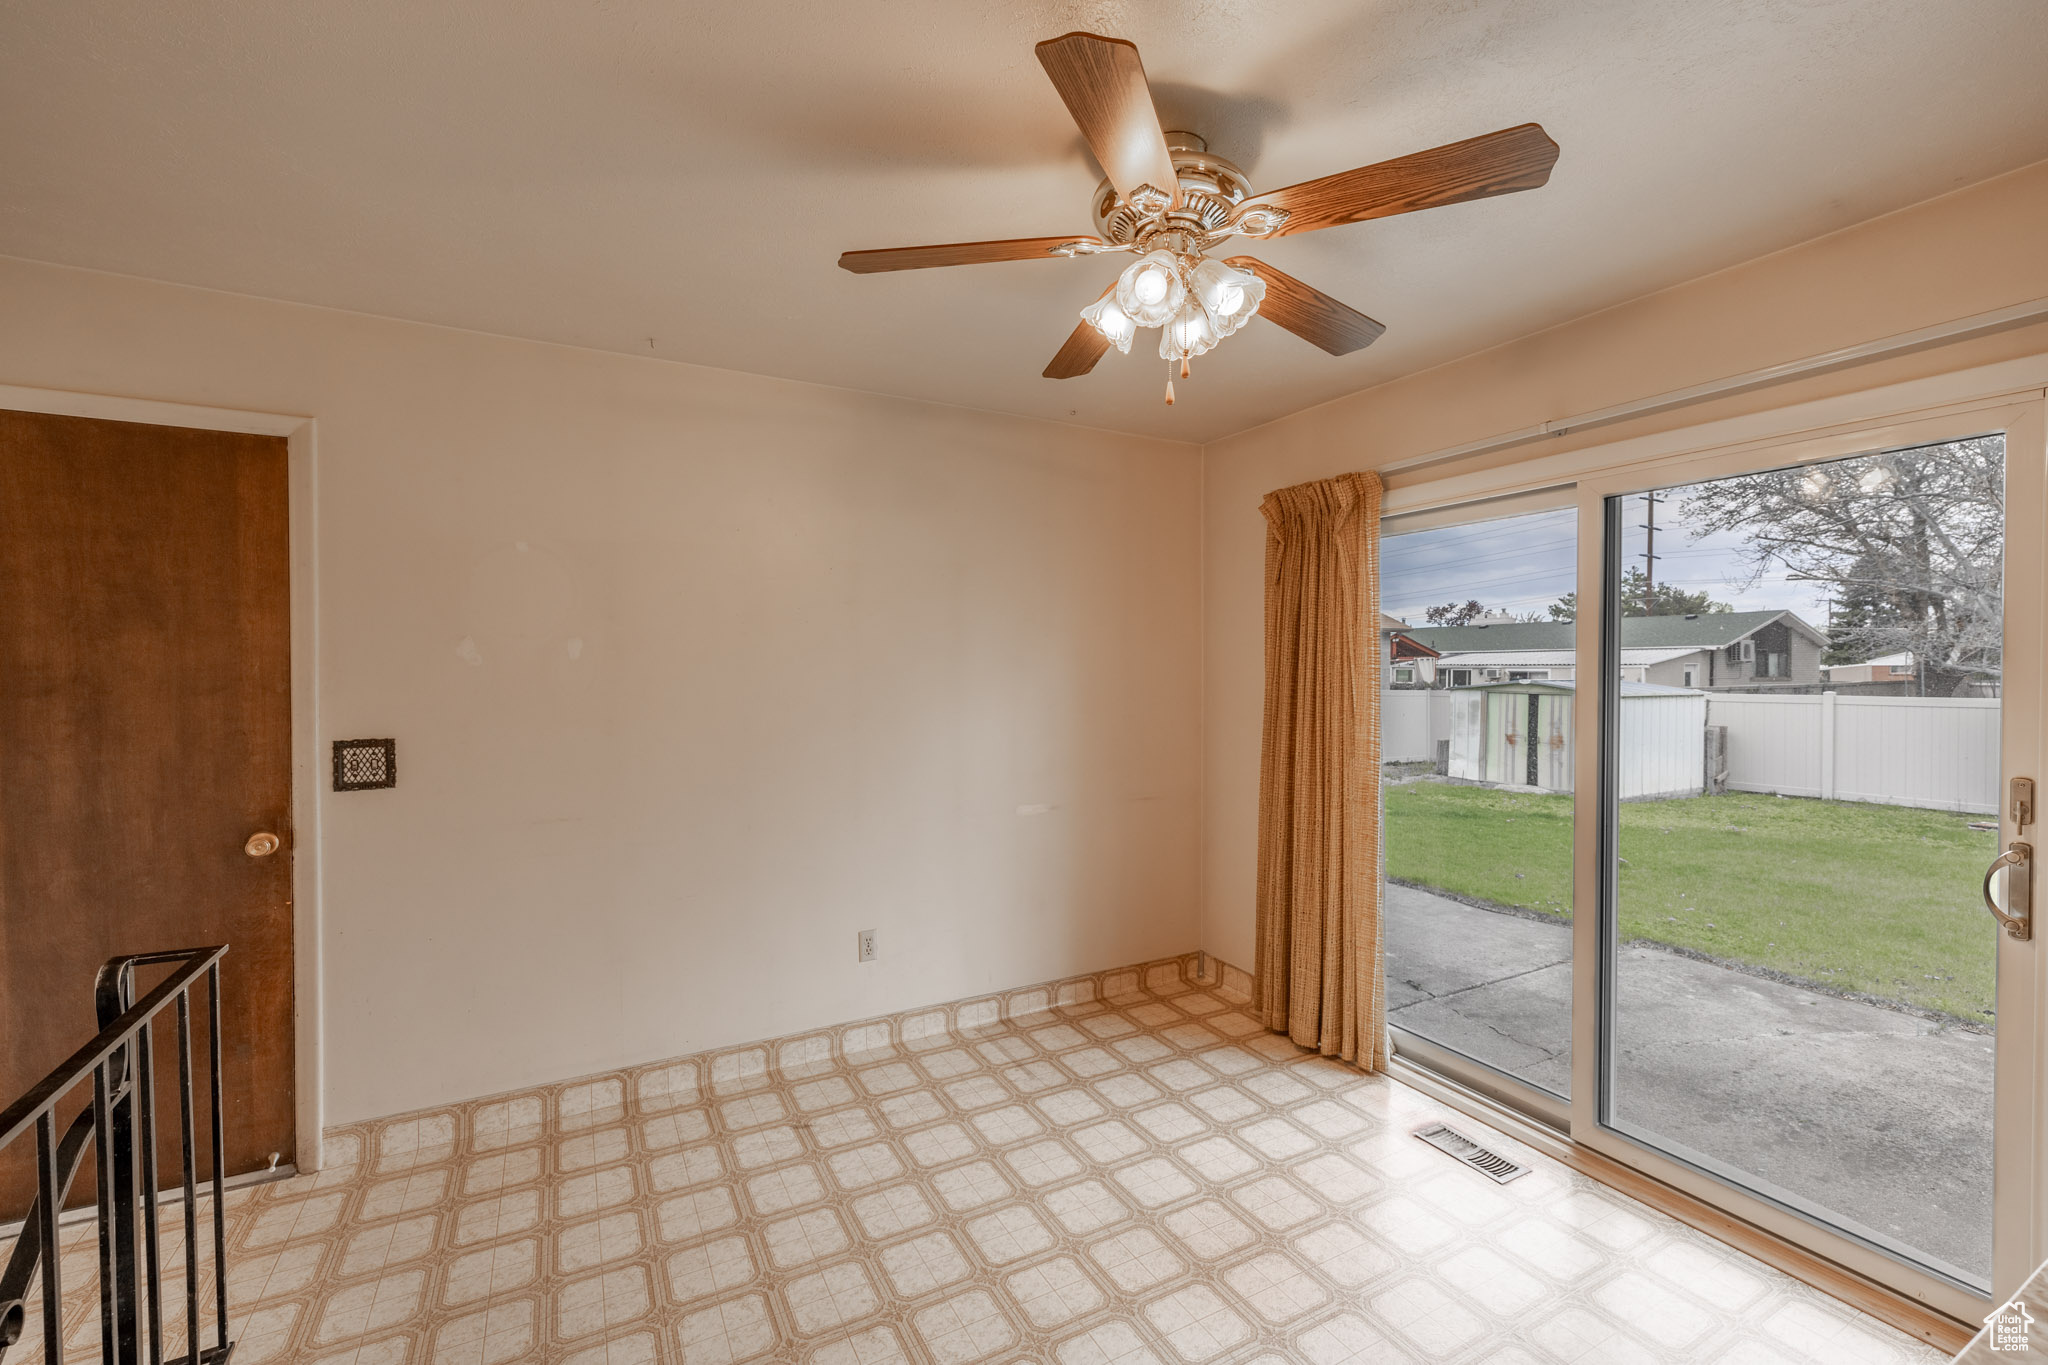 Tiled empty room featuring ceiling fan